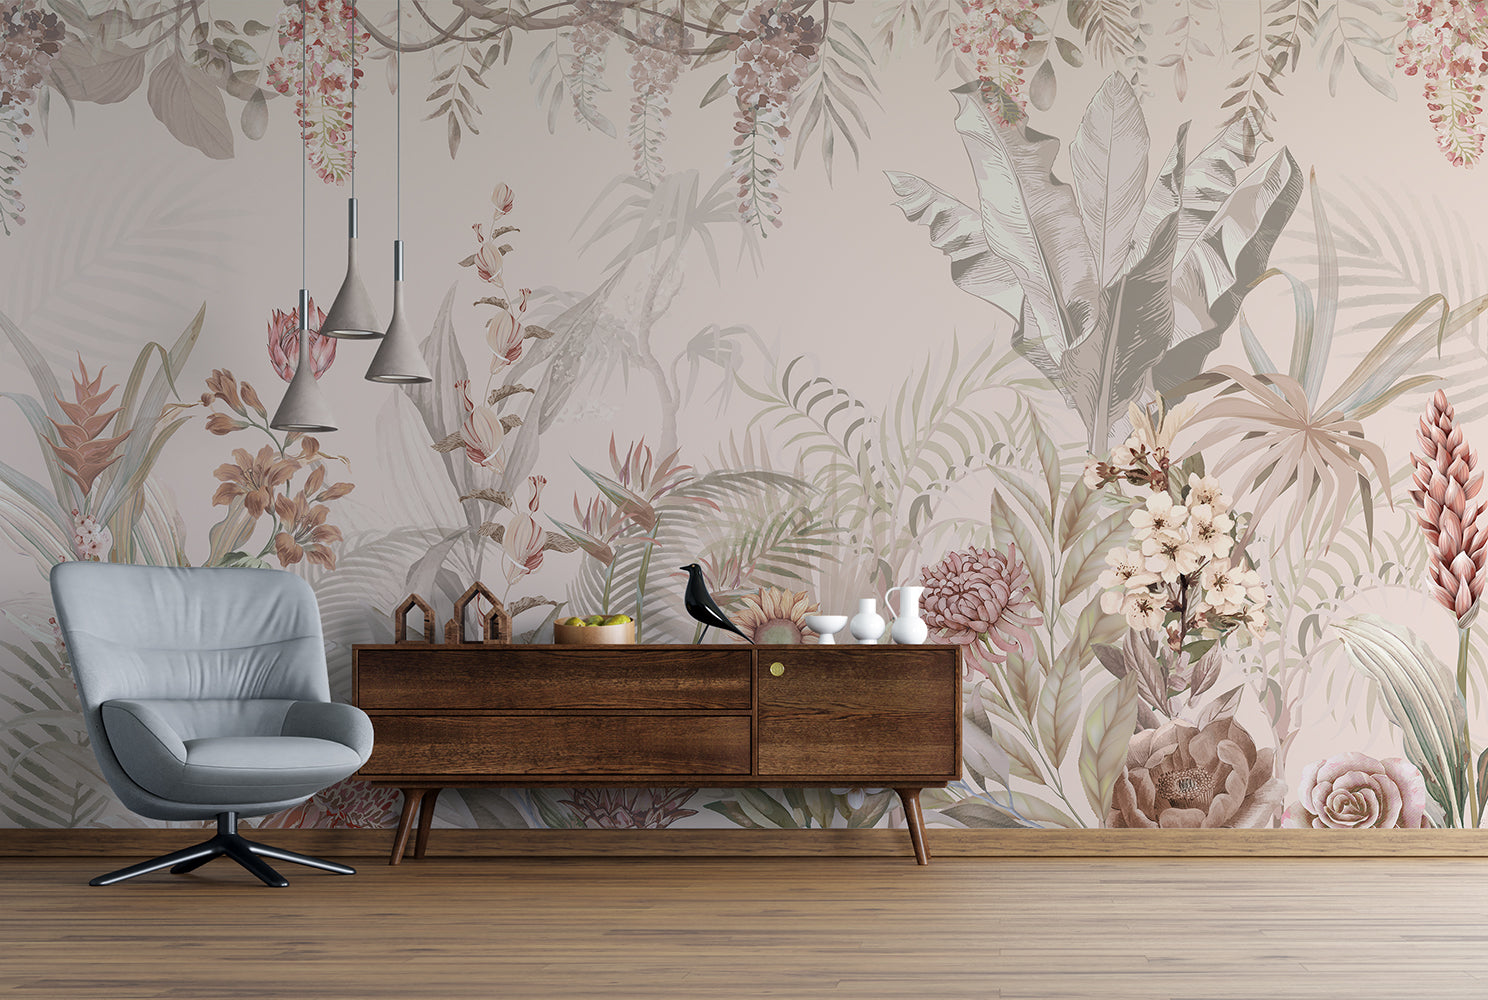 Buy 10 Feet Royal Pretty Tropical Wallpaper at 8 OFF by Design by  Metamorph  Pepperfry